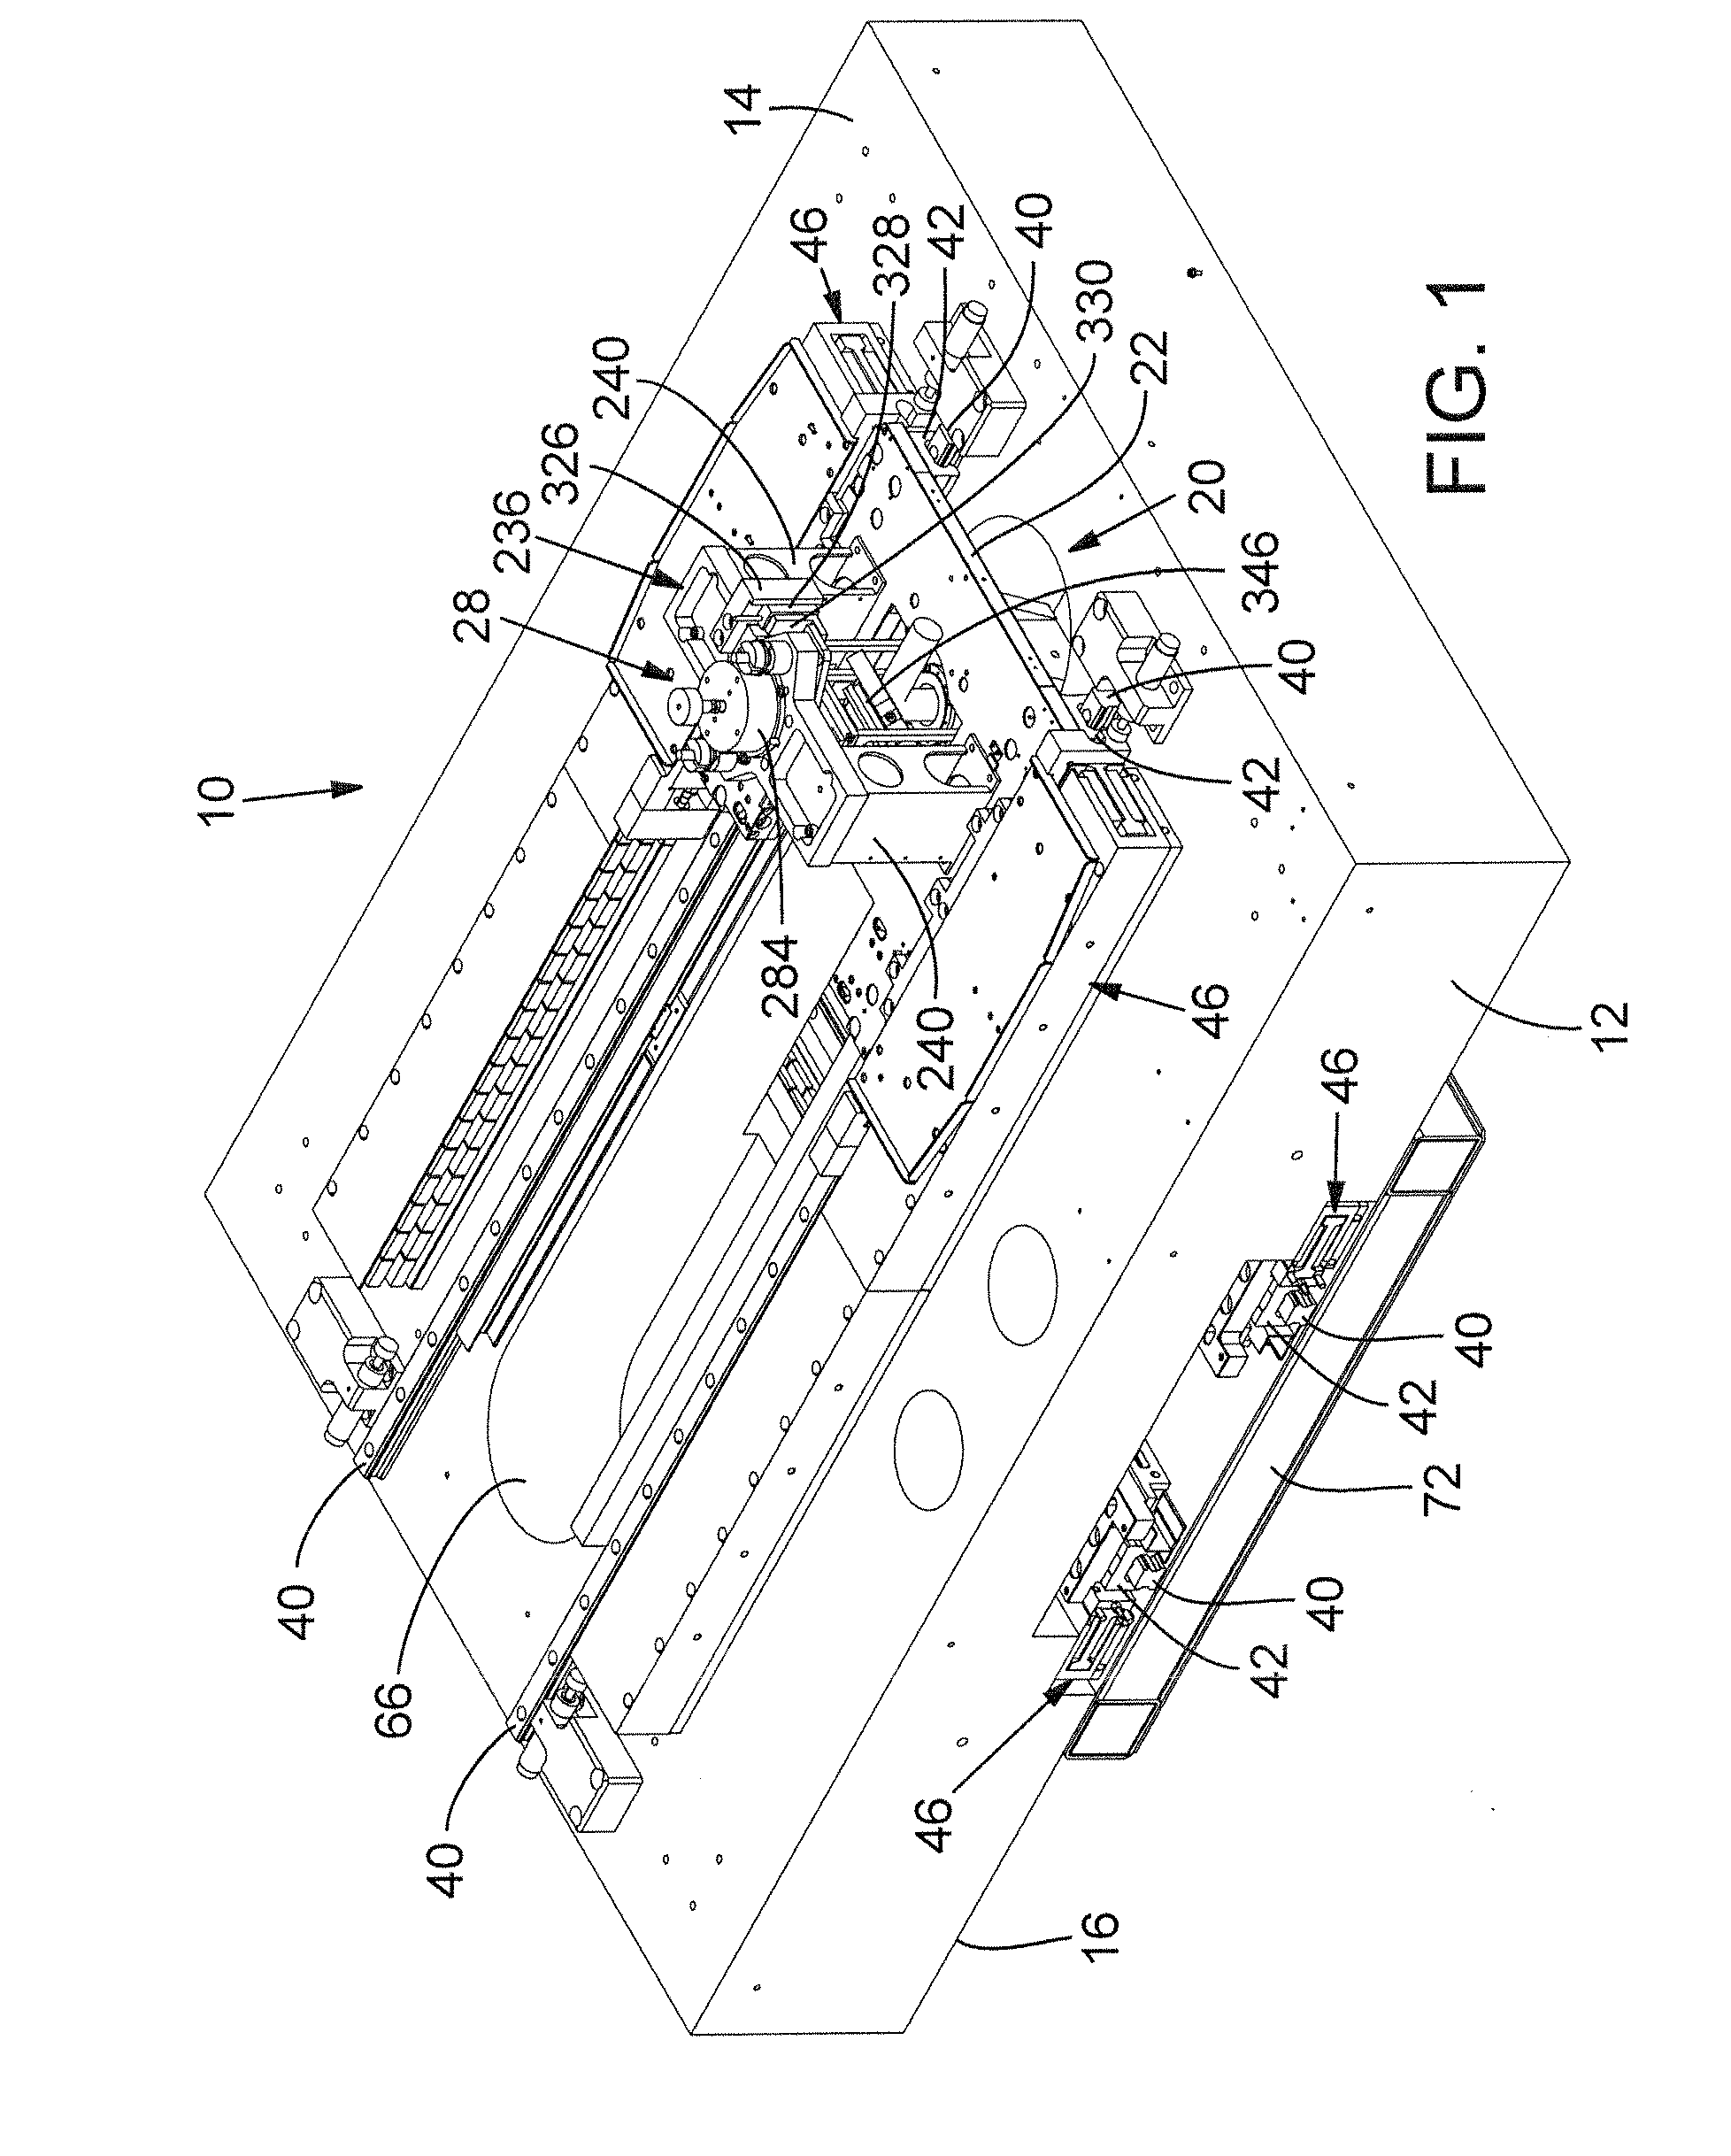 Air bearing assembly for guiding motion of optical components of a laser processing system